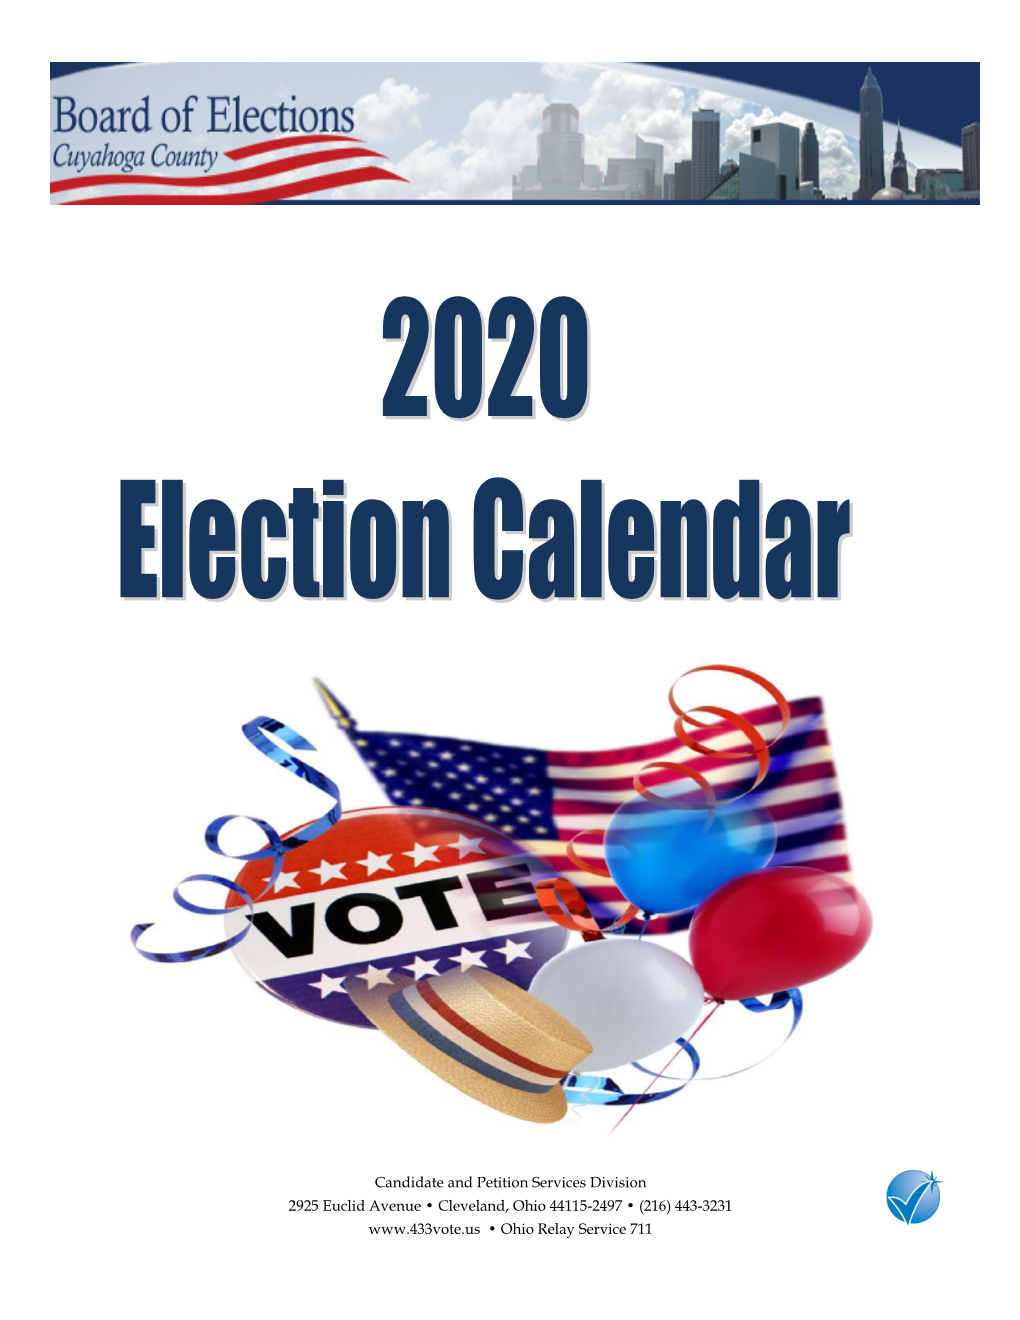 General Election Is March 16, 2020 (Day Before the Primary Election)